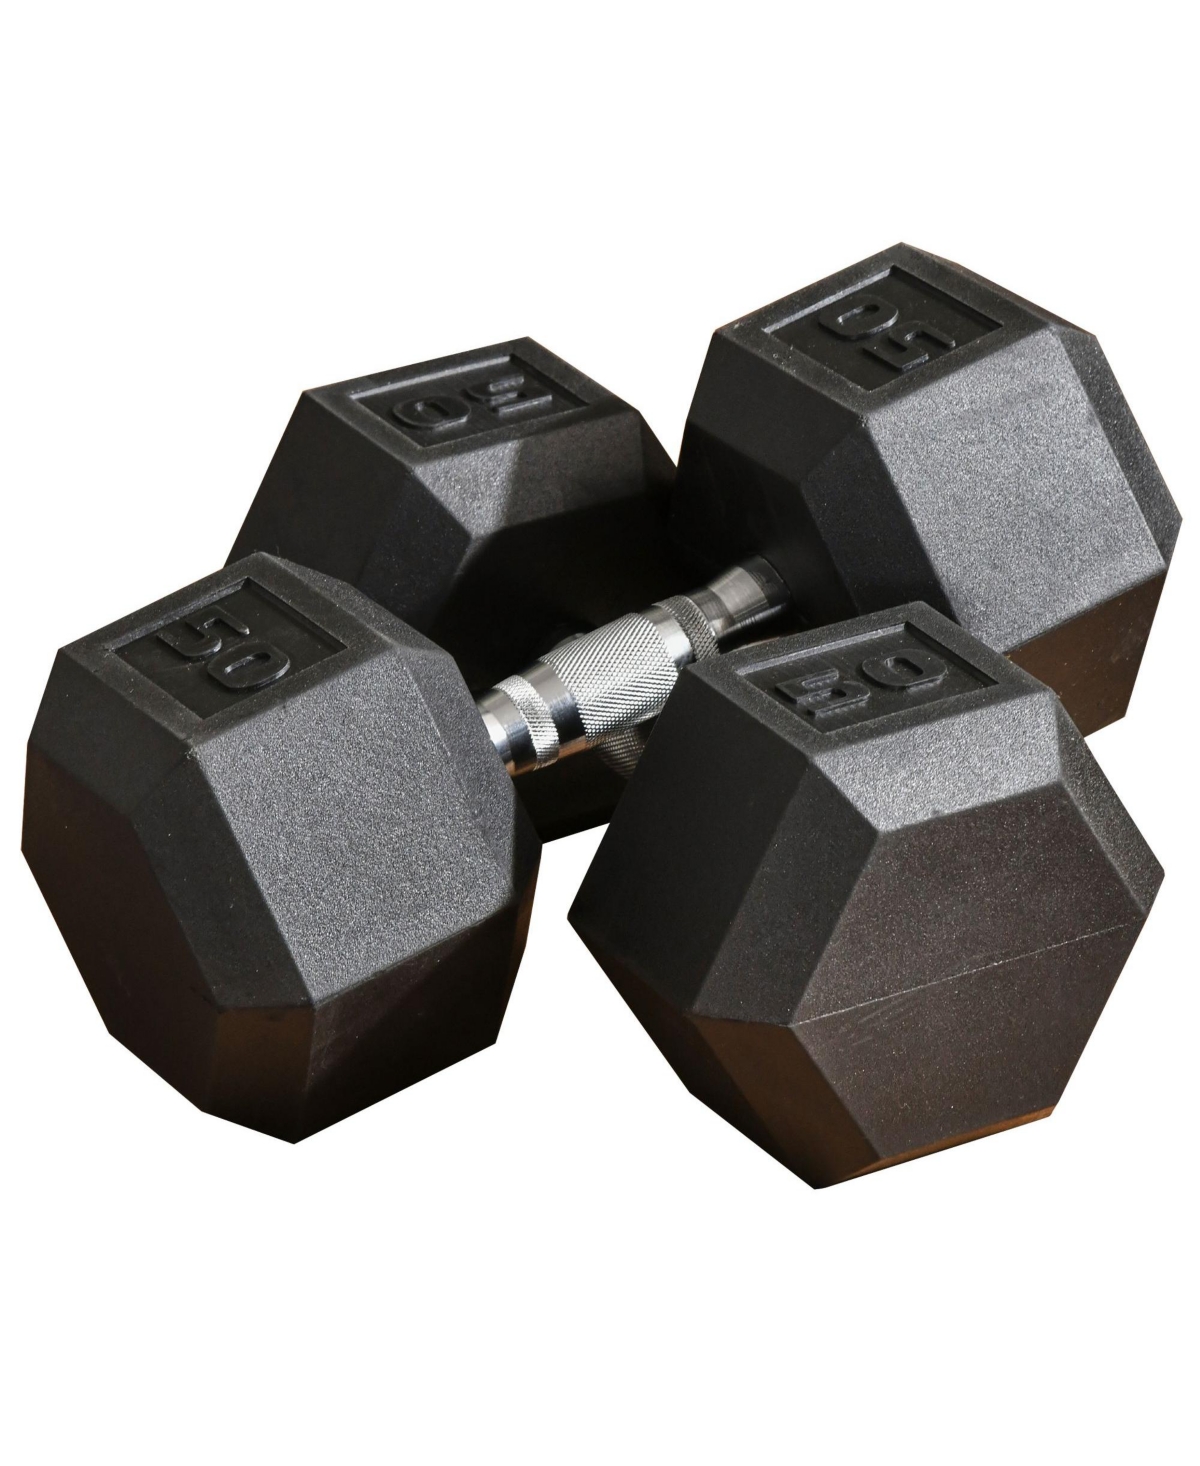 2 x 50lbs Hex Dumbbell Set of 2, Rubber Weights Exercise Fitness Dumbbell with Non-Slip Handles, Anti-roll, for Women or Men Home Gym Workout